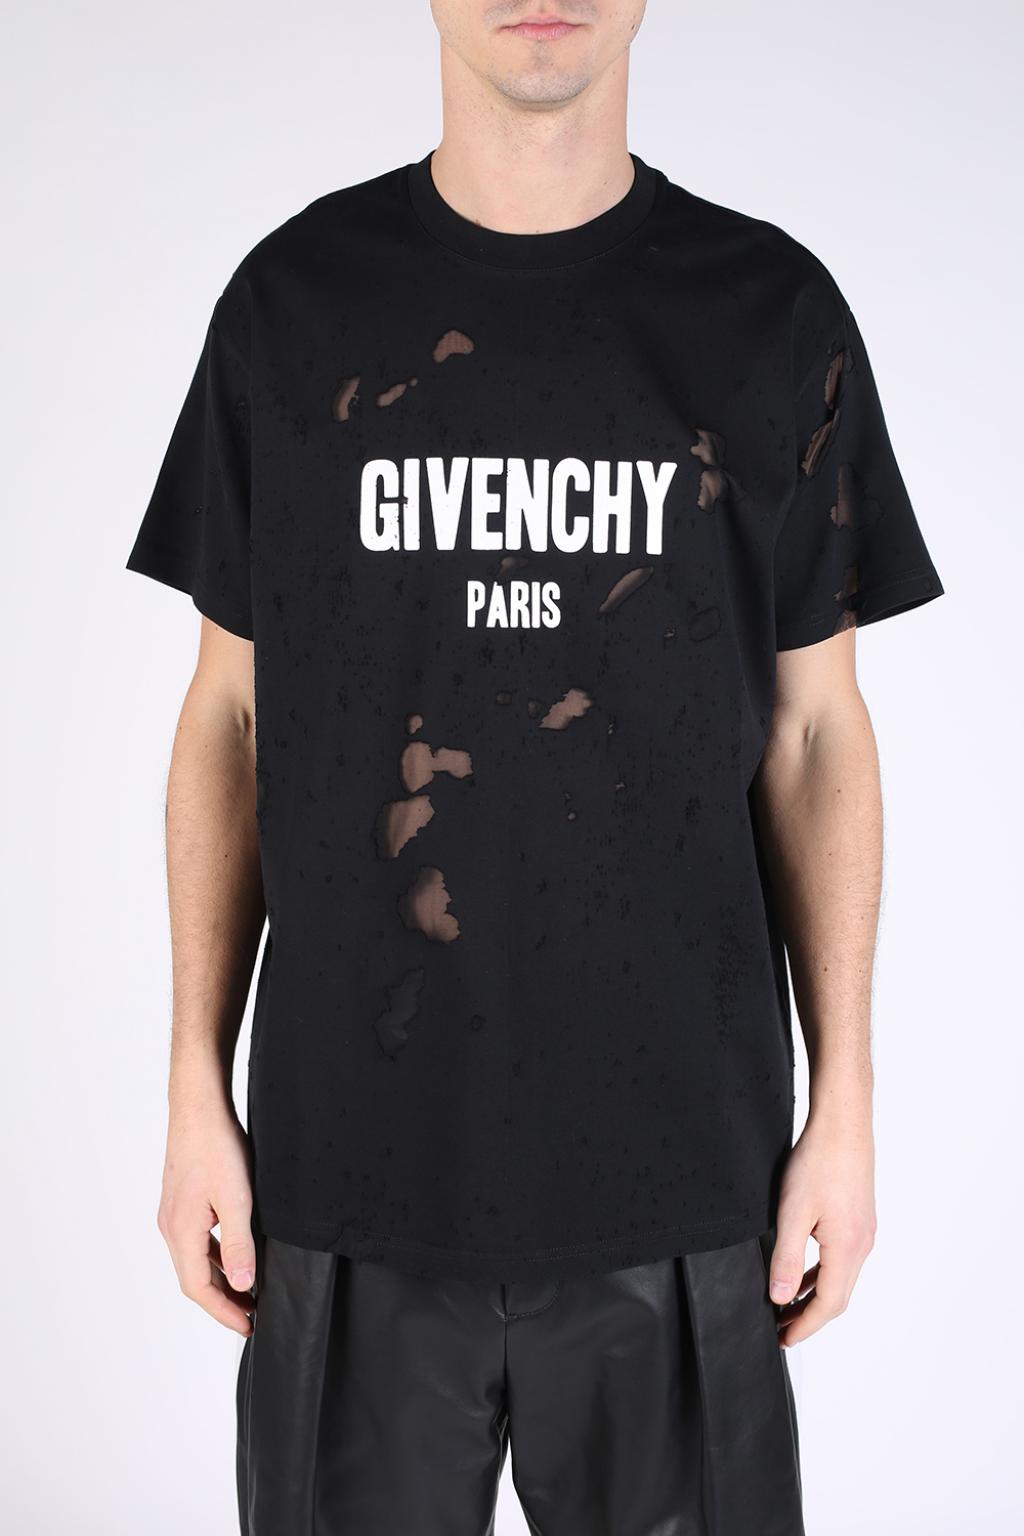 givenchy sweater holes